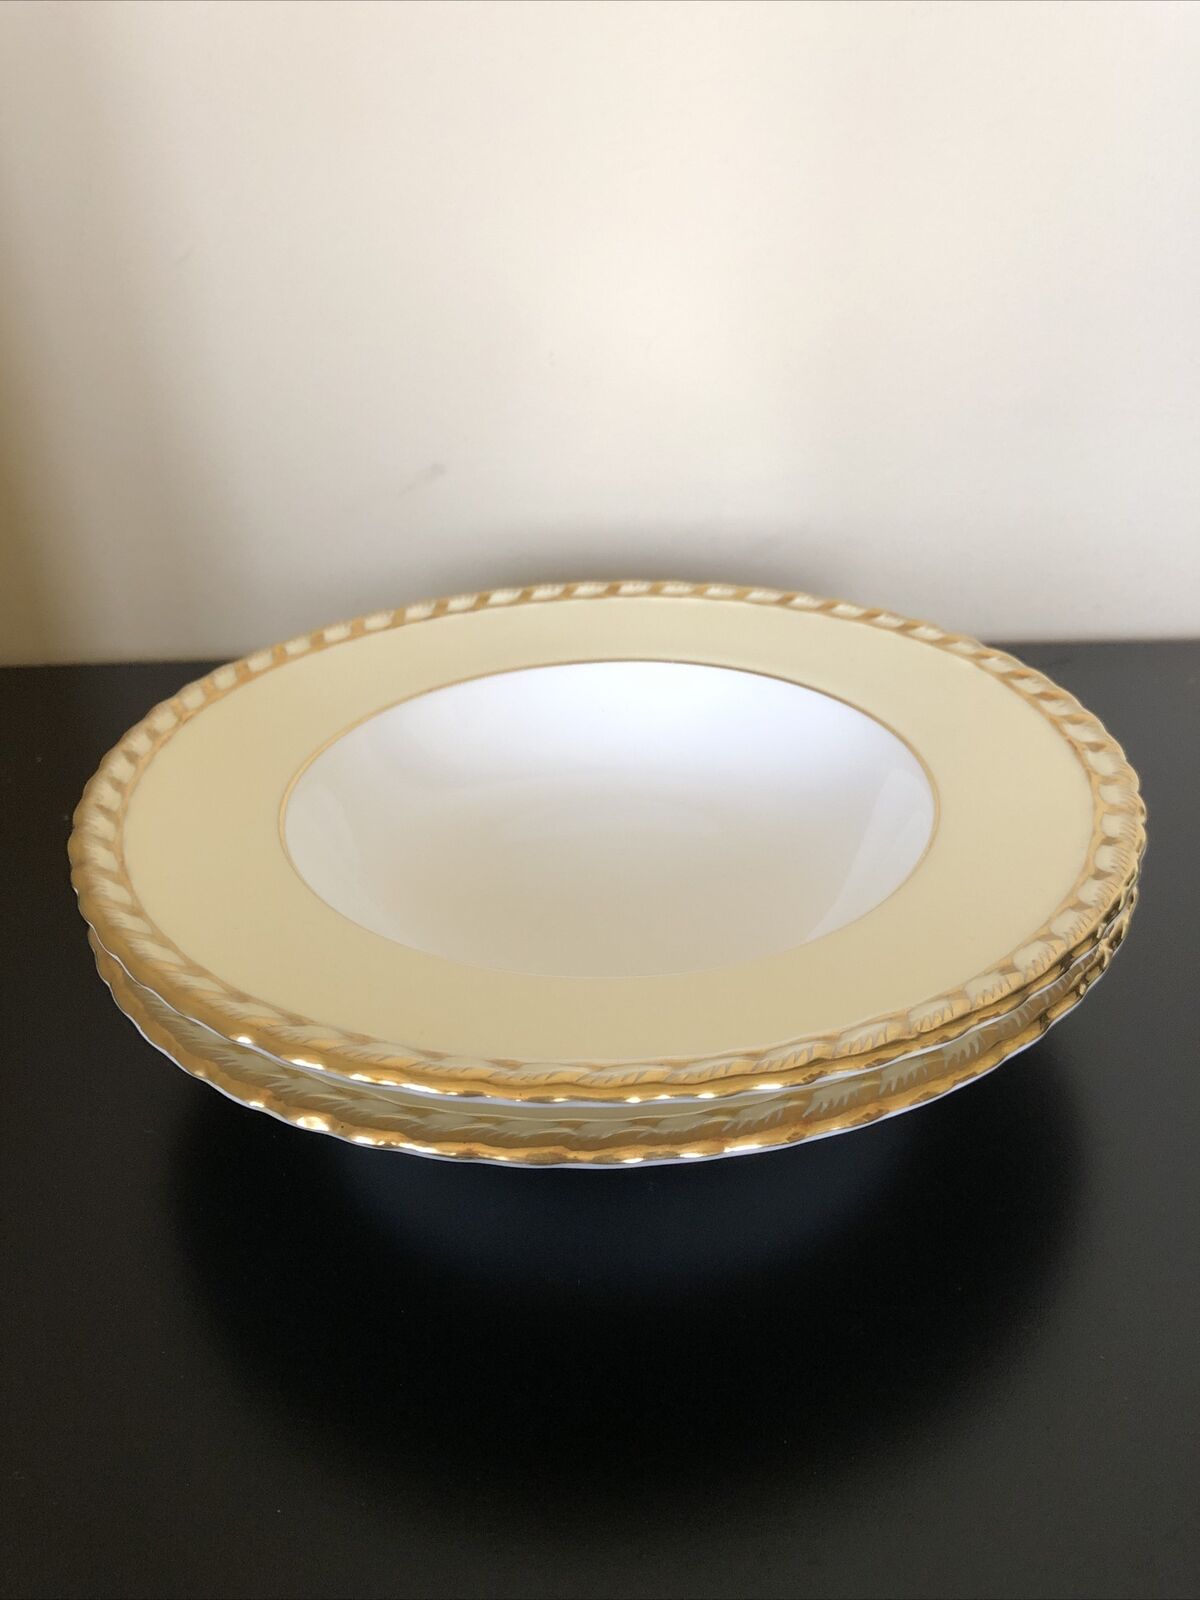 2 Commodore By Minton Soup Bowls Embossed Edge Gold Rope Design Large Rim